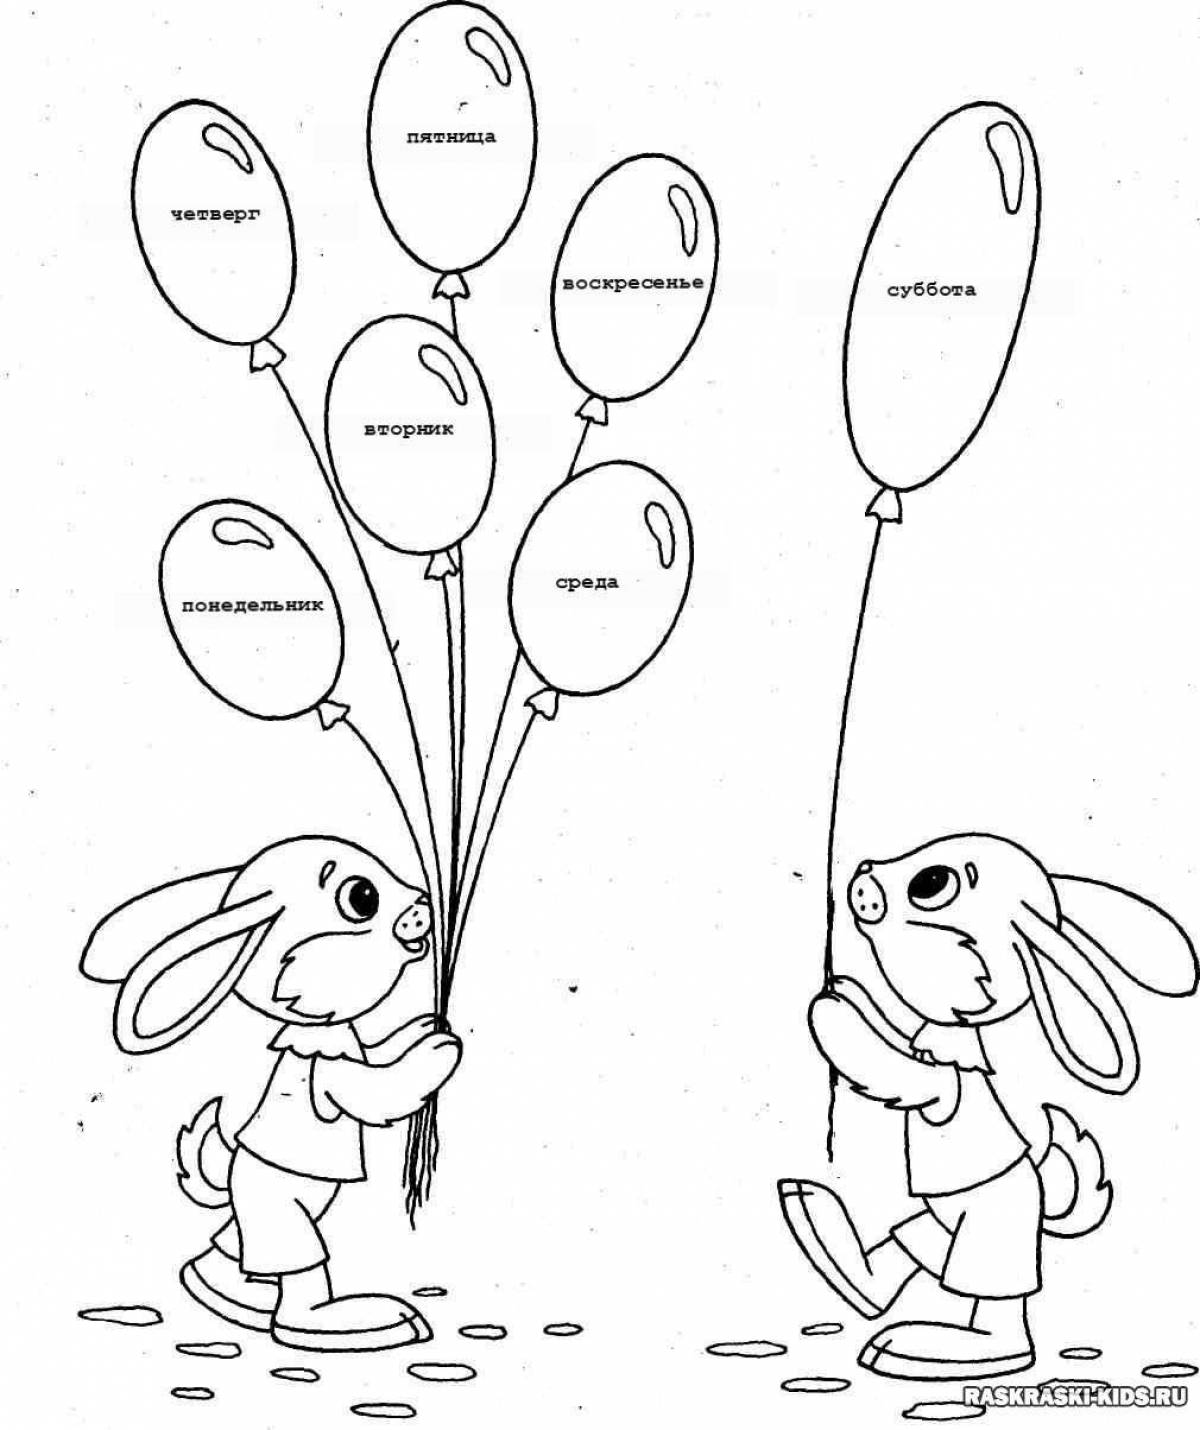 Fun weekday coloring pages for preschoolers